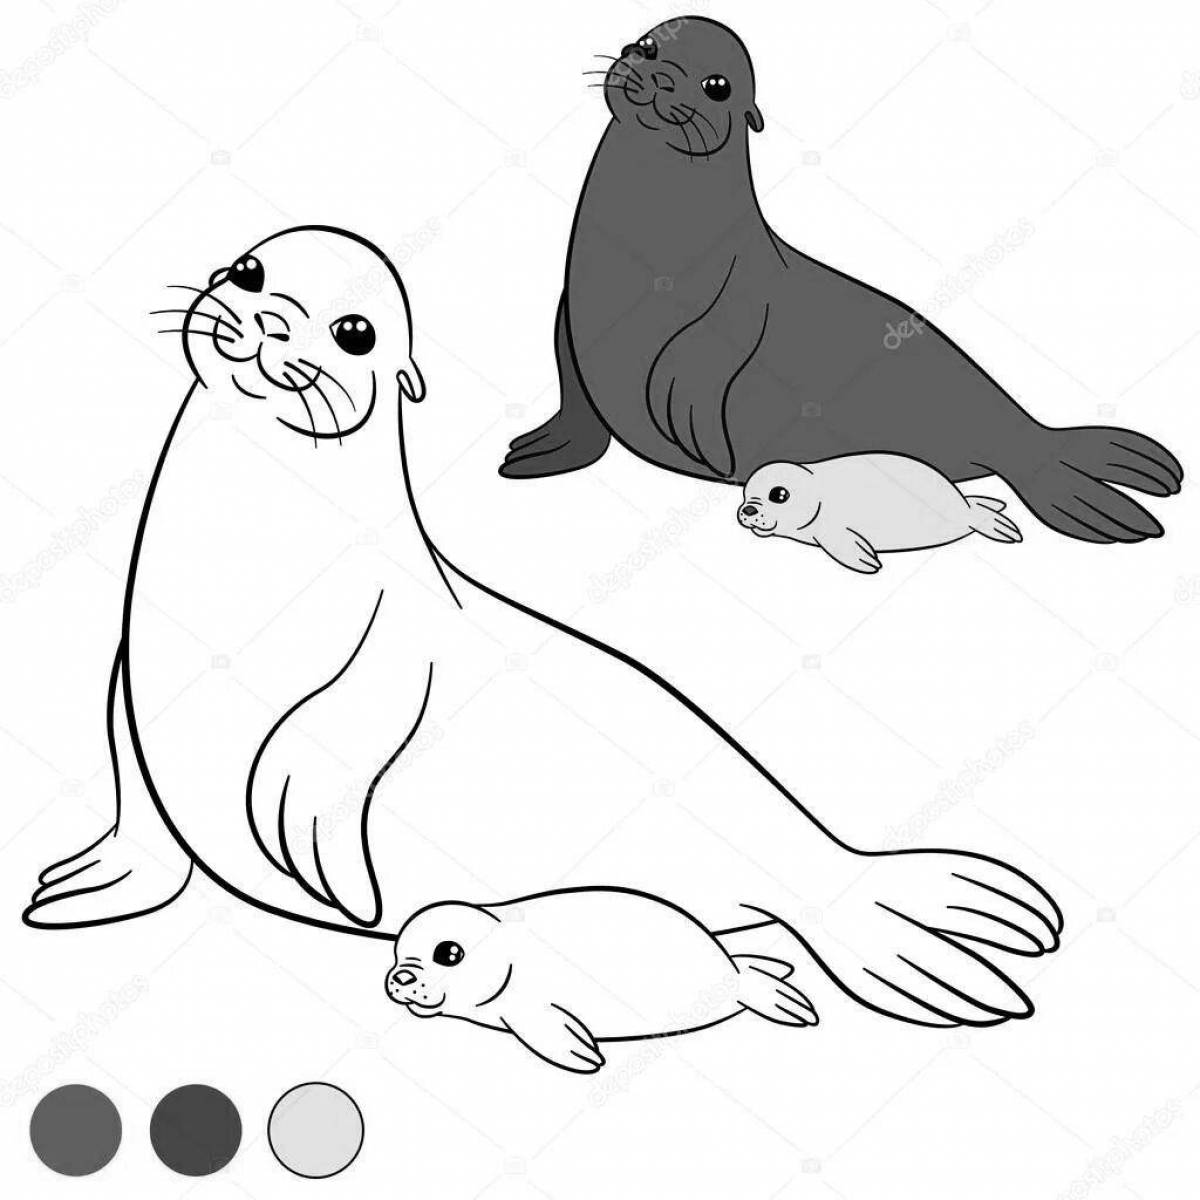 Coloring book witty harbor seal